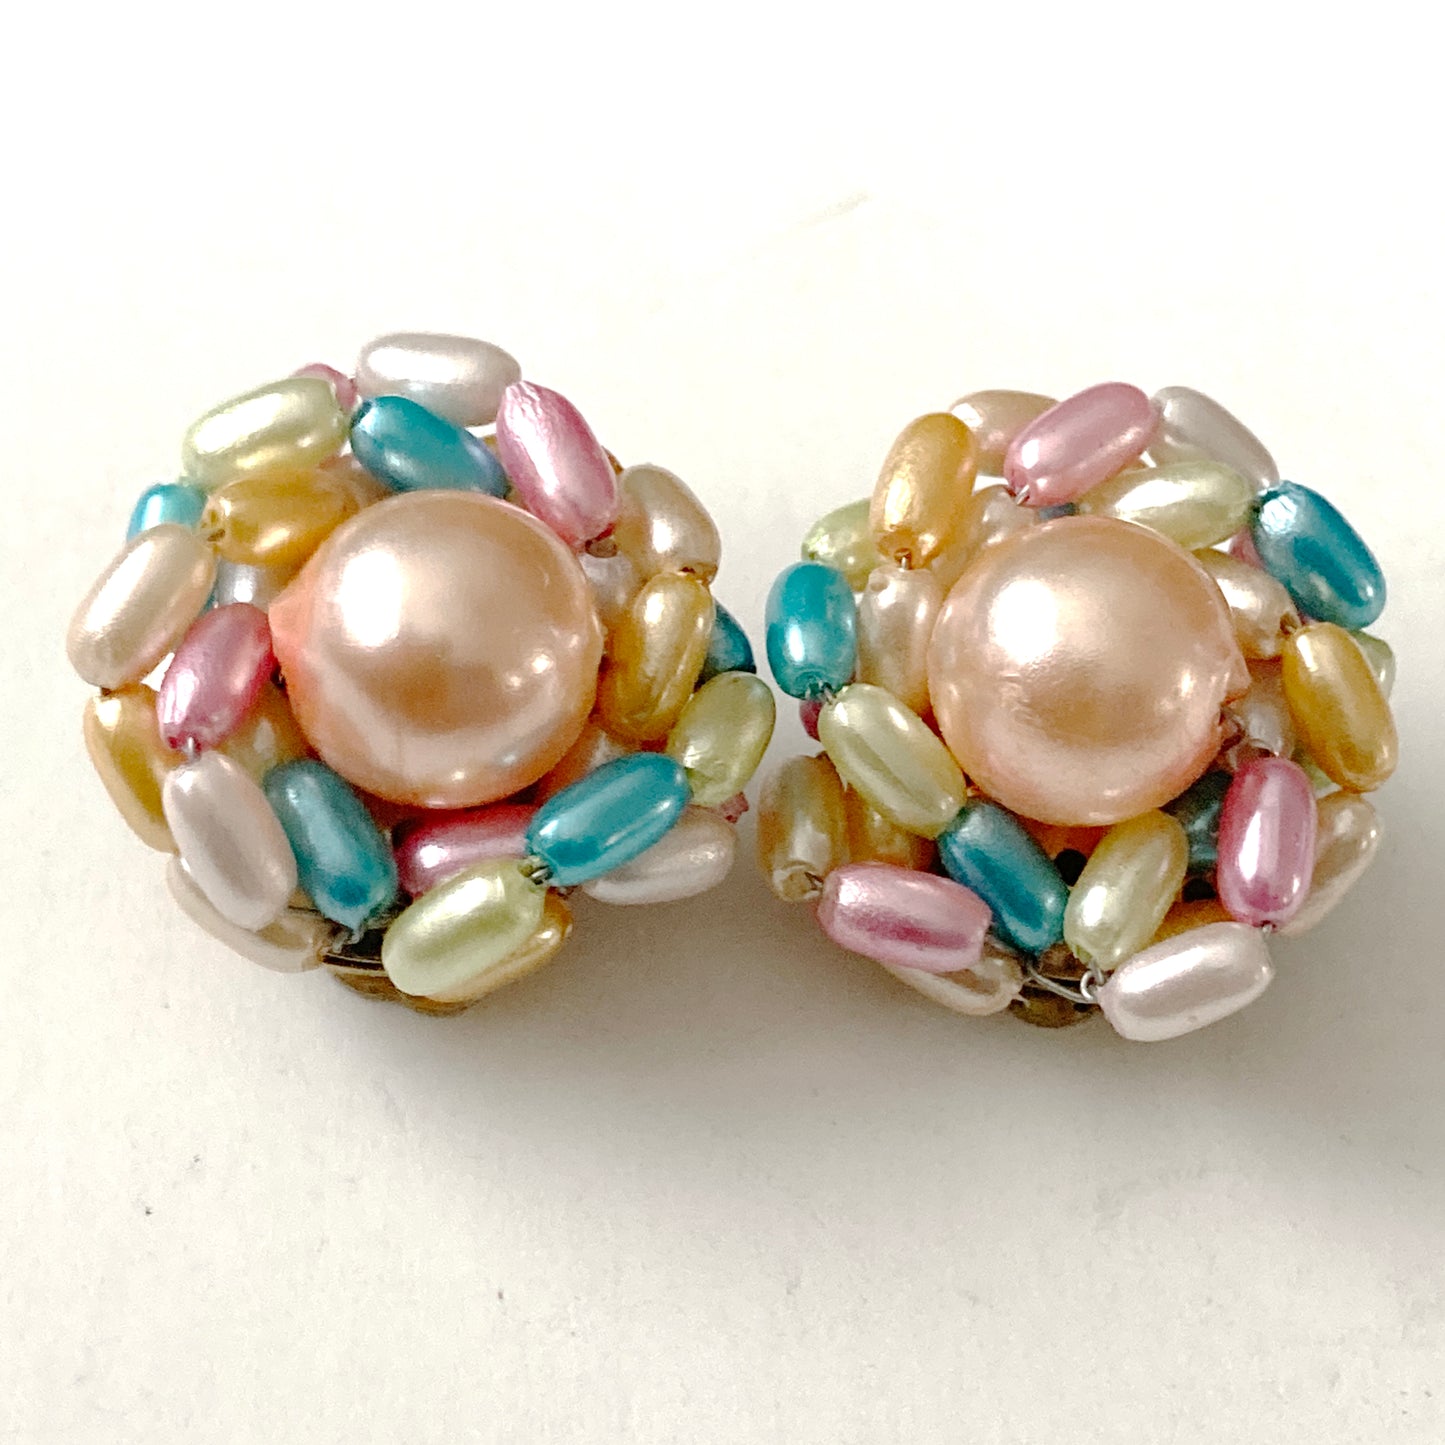 Pastel Pearlized Cluster Earrings Marked Hong Kong